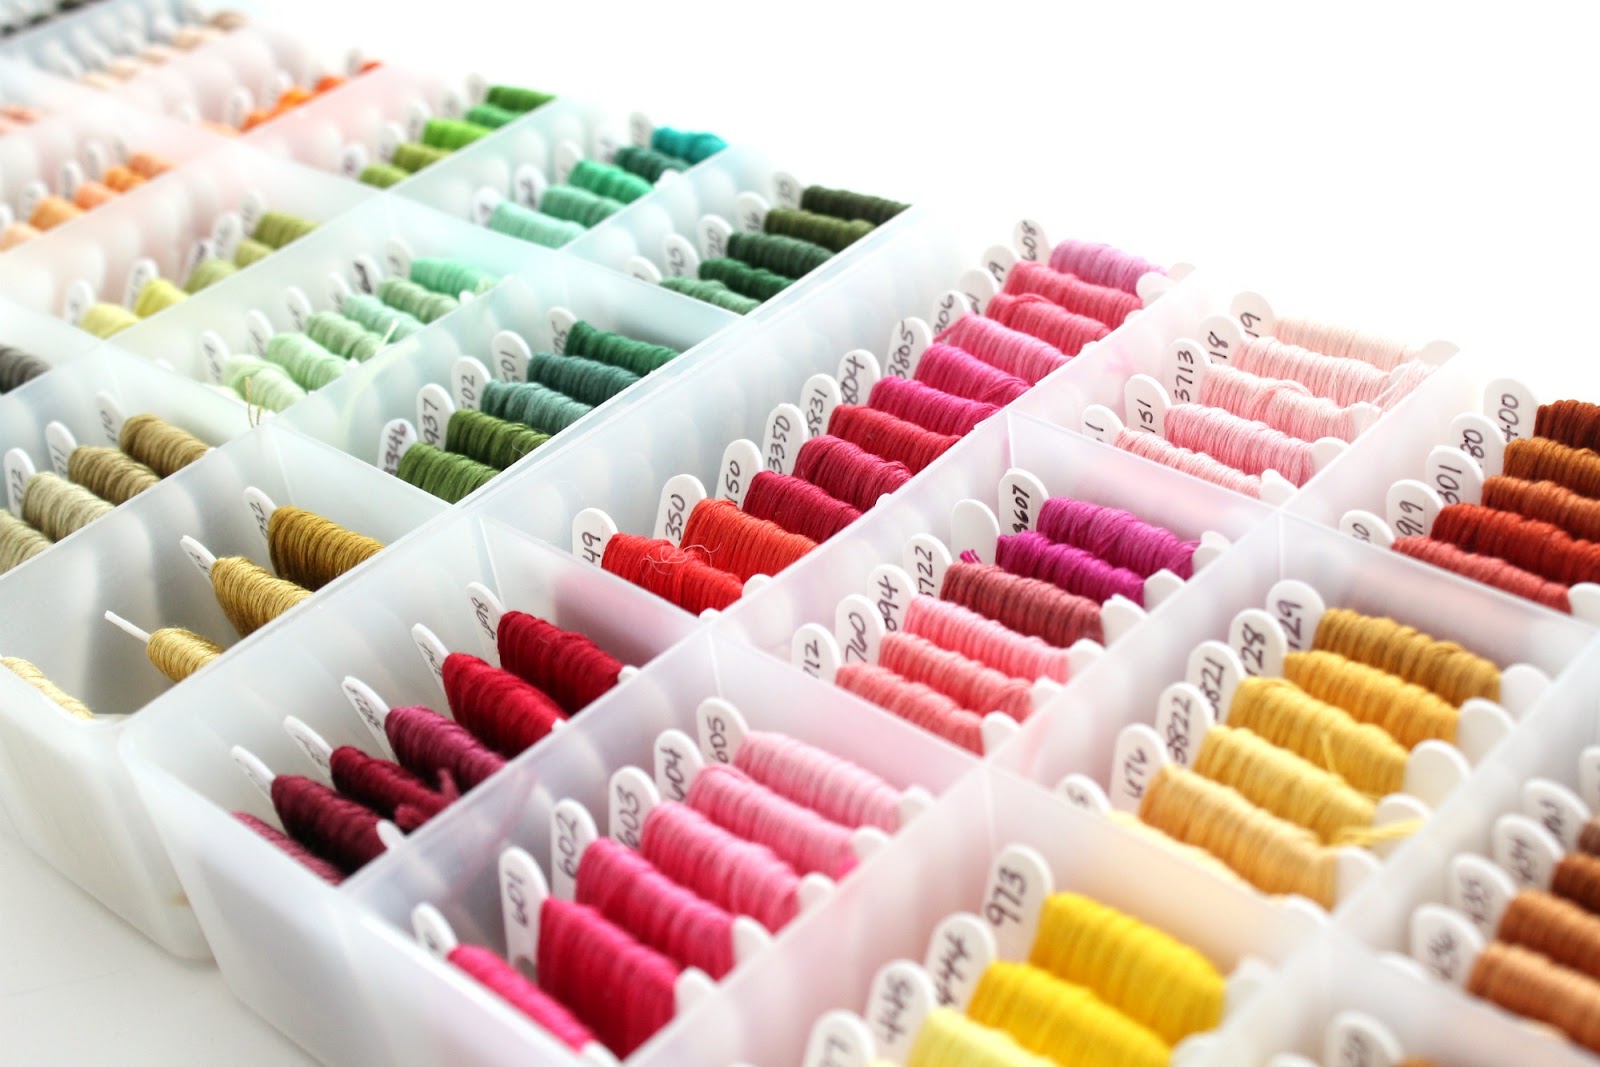 Organizing Your Embroidery Floss